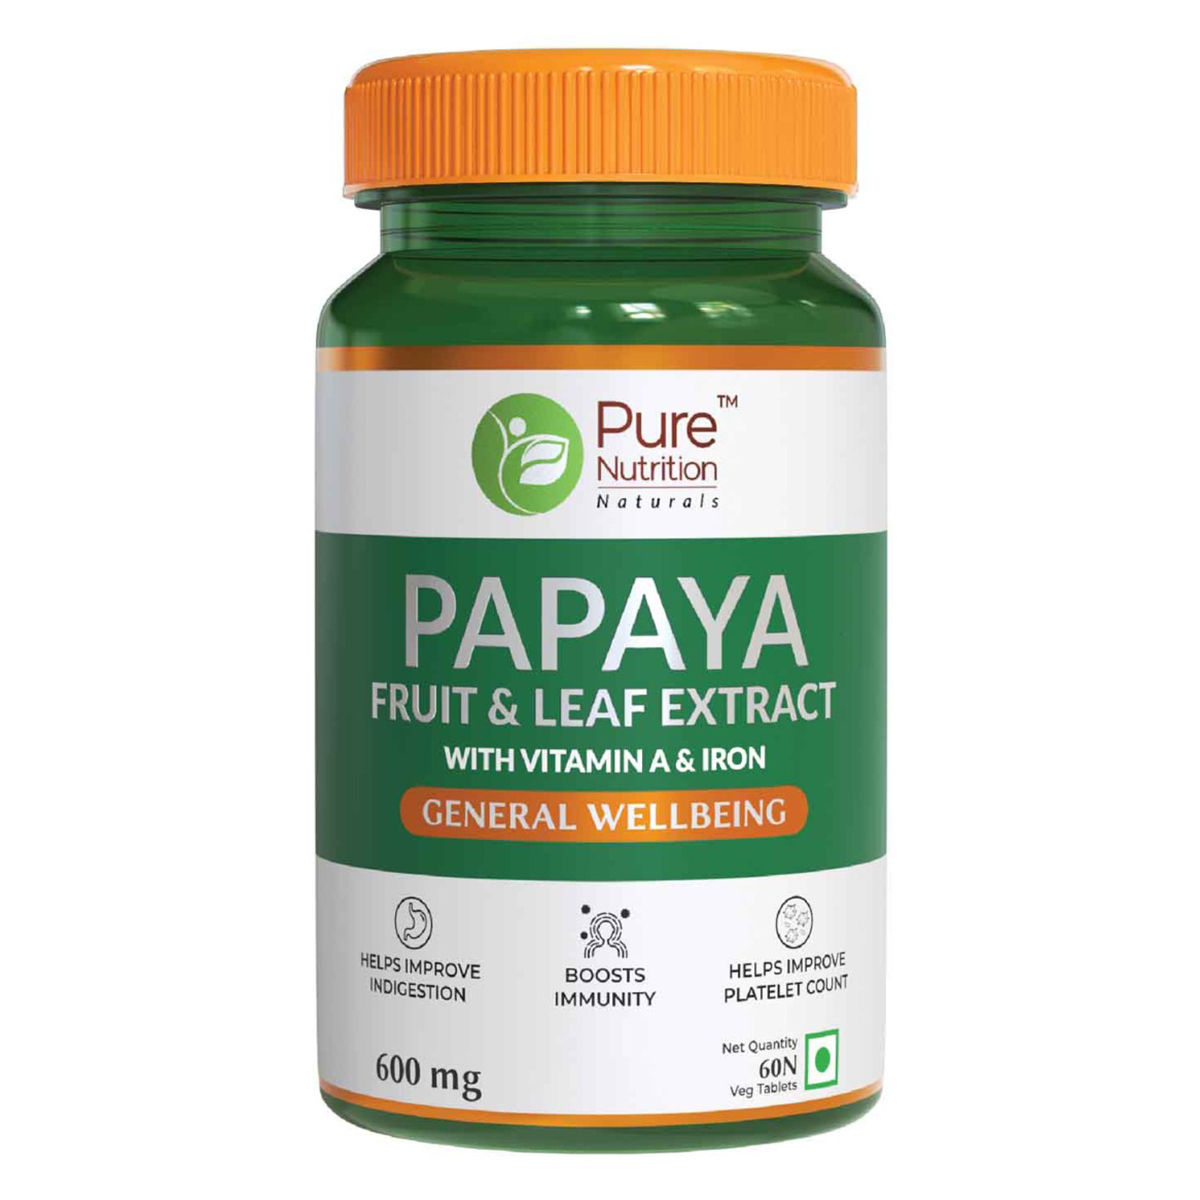 Buy Pure Nutrition Papaya Fruit & Leaf Extract 600 mg, 60 Tablets Online